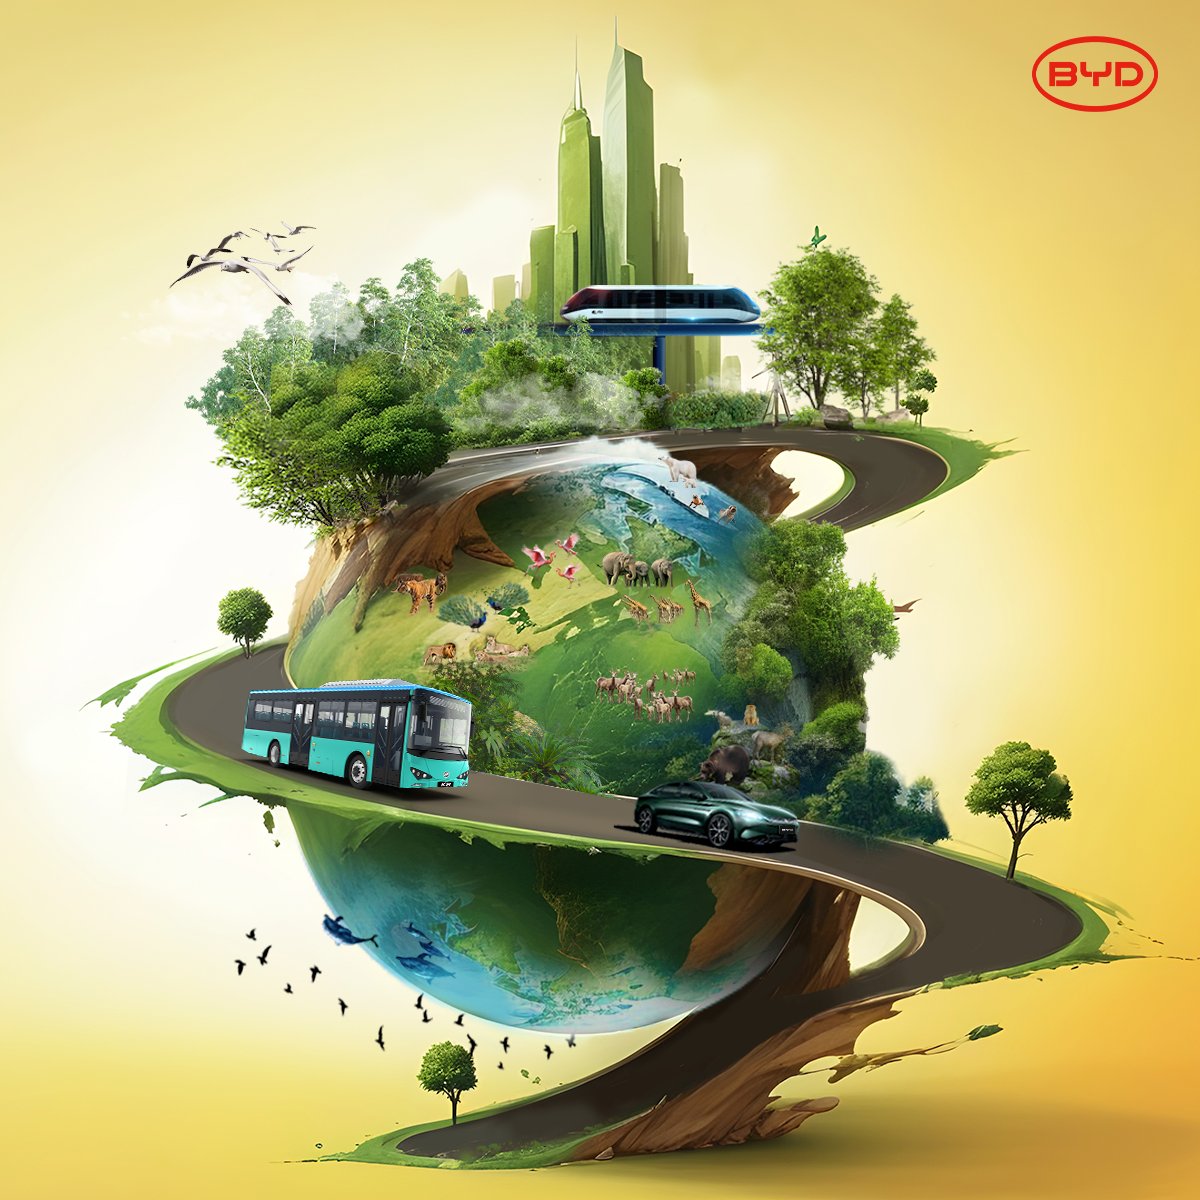 This International Day for Biological Diversity, join us in promoting biodiversity through green mobility solutions for a greener future!

#BYD #BuildYourDreams #InternationalDayForBiologicalDiversity #CoolTheEarthByOneDegree